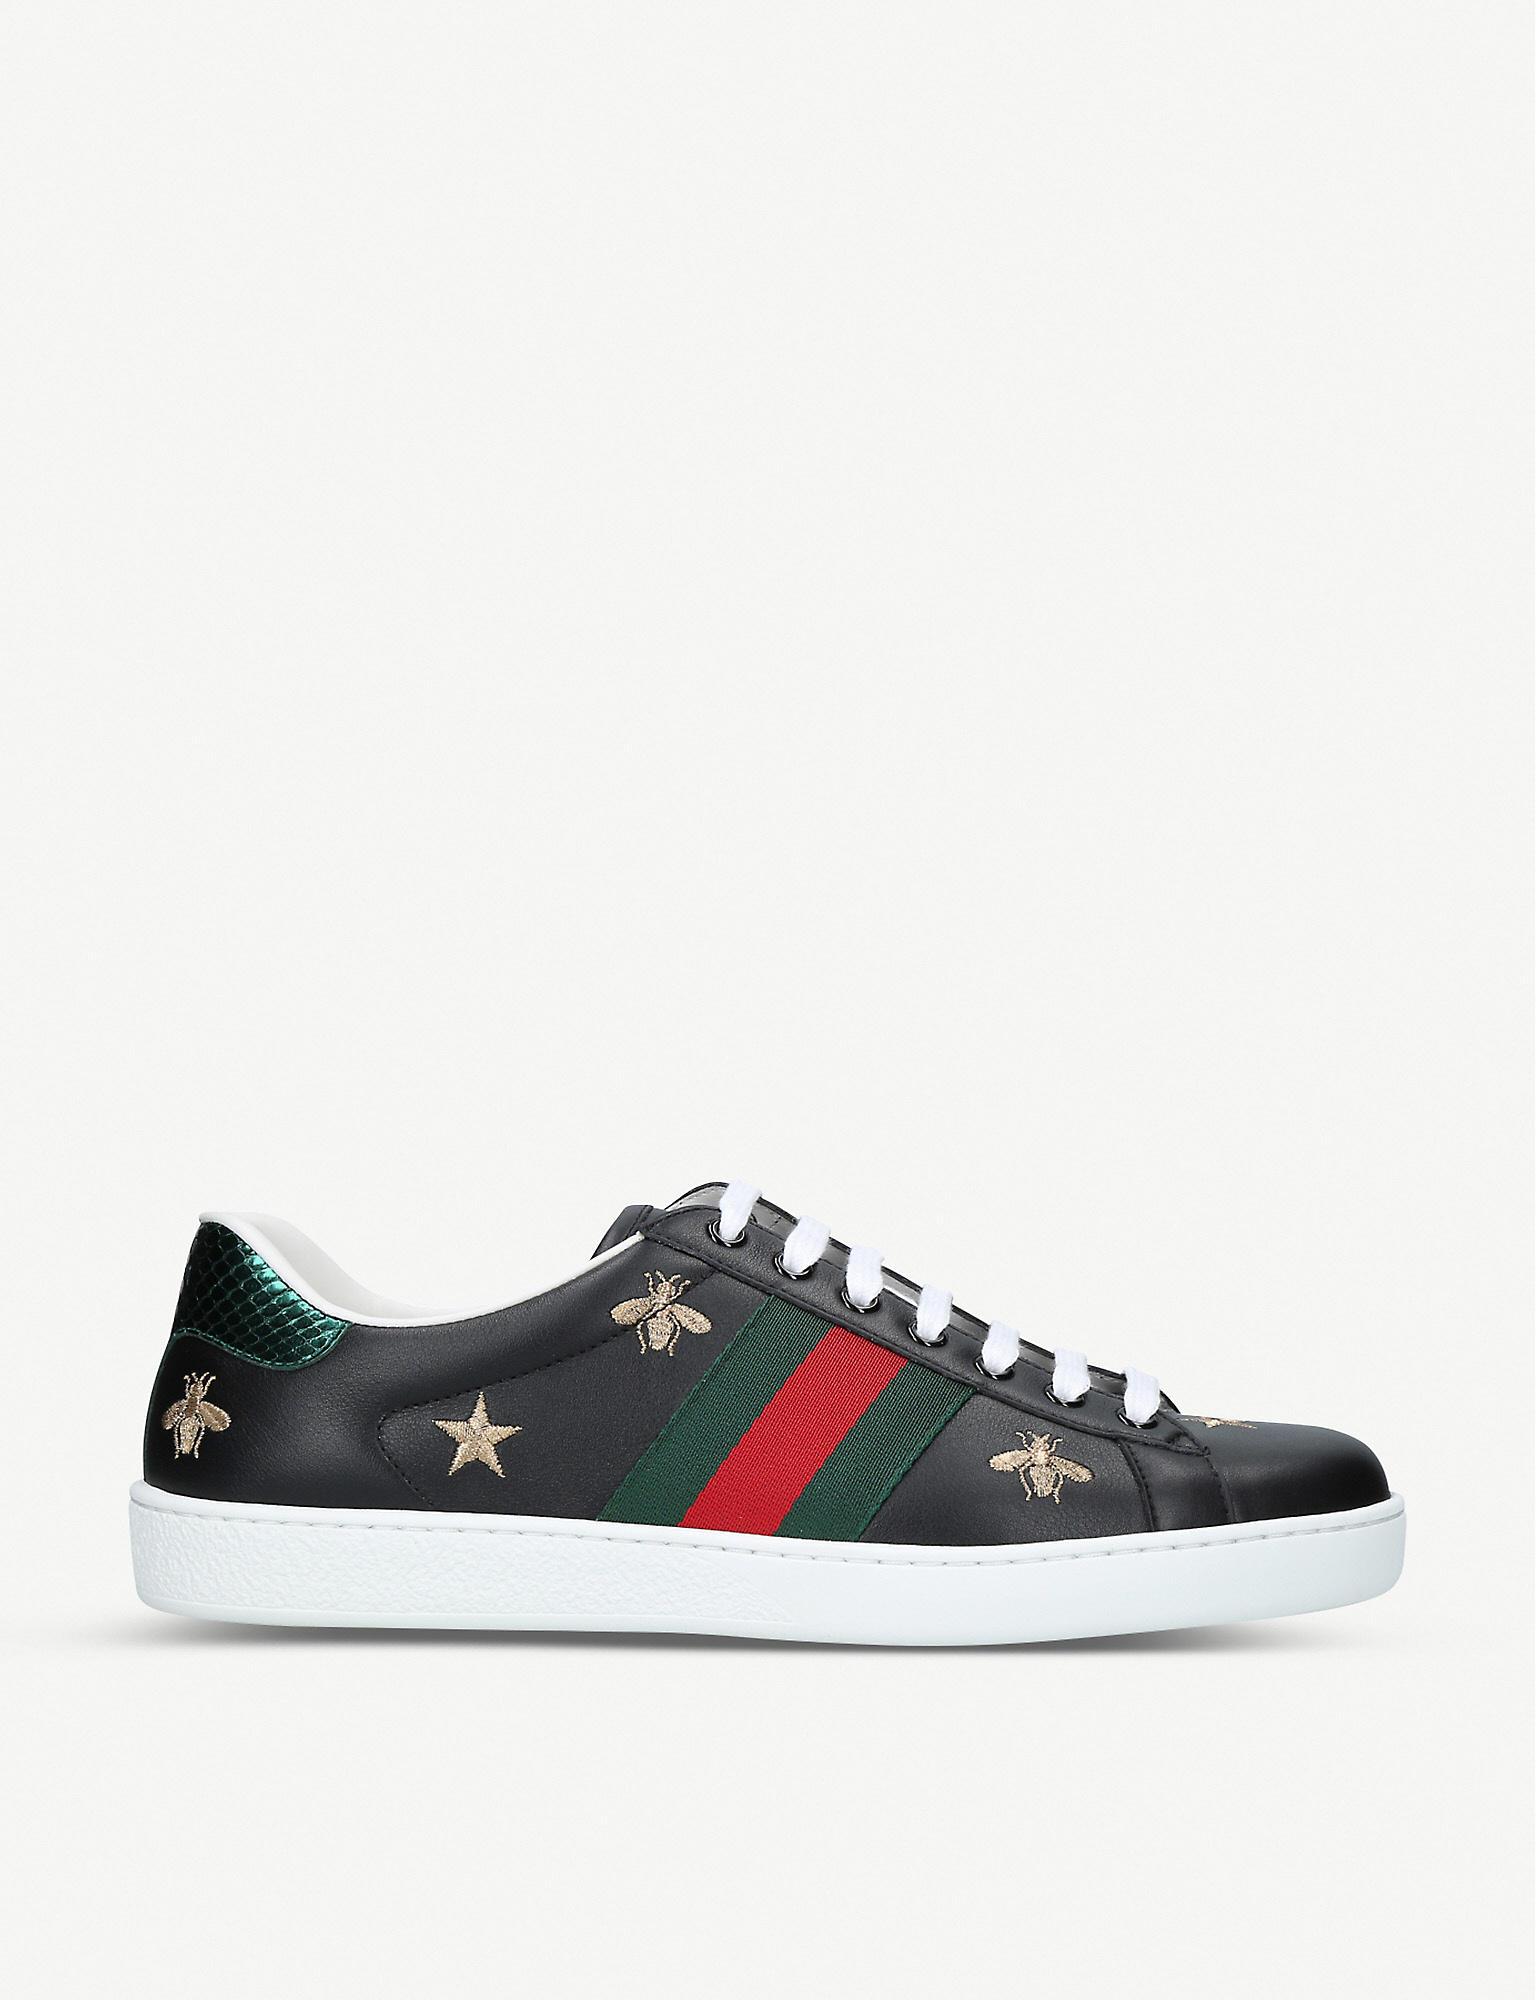 Gucci Ace Bee Embroidered Men's Leather Sneakers Black US 7.5